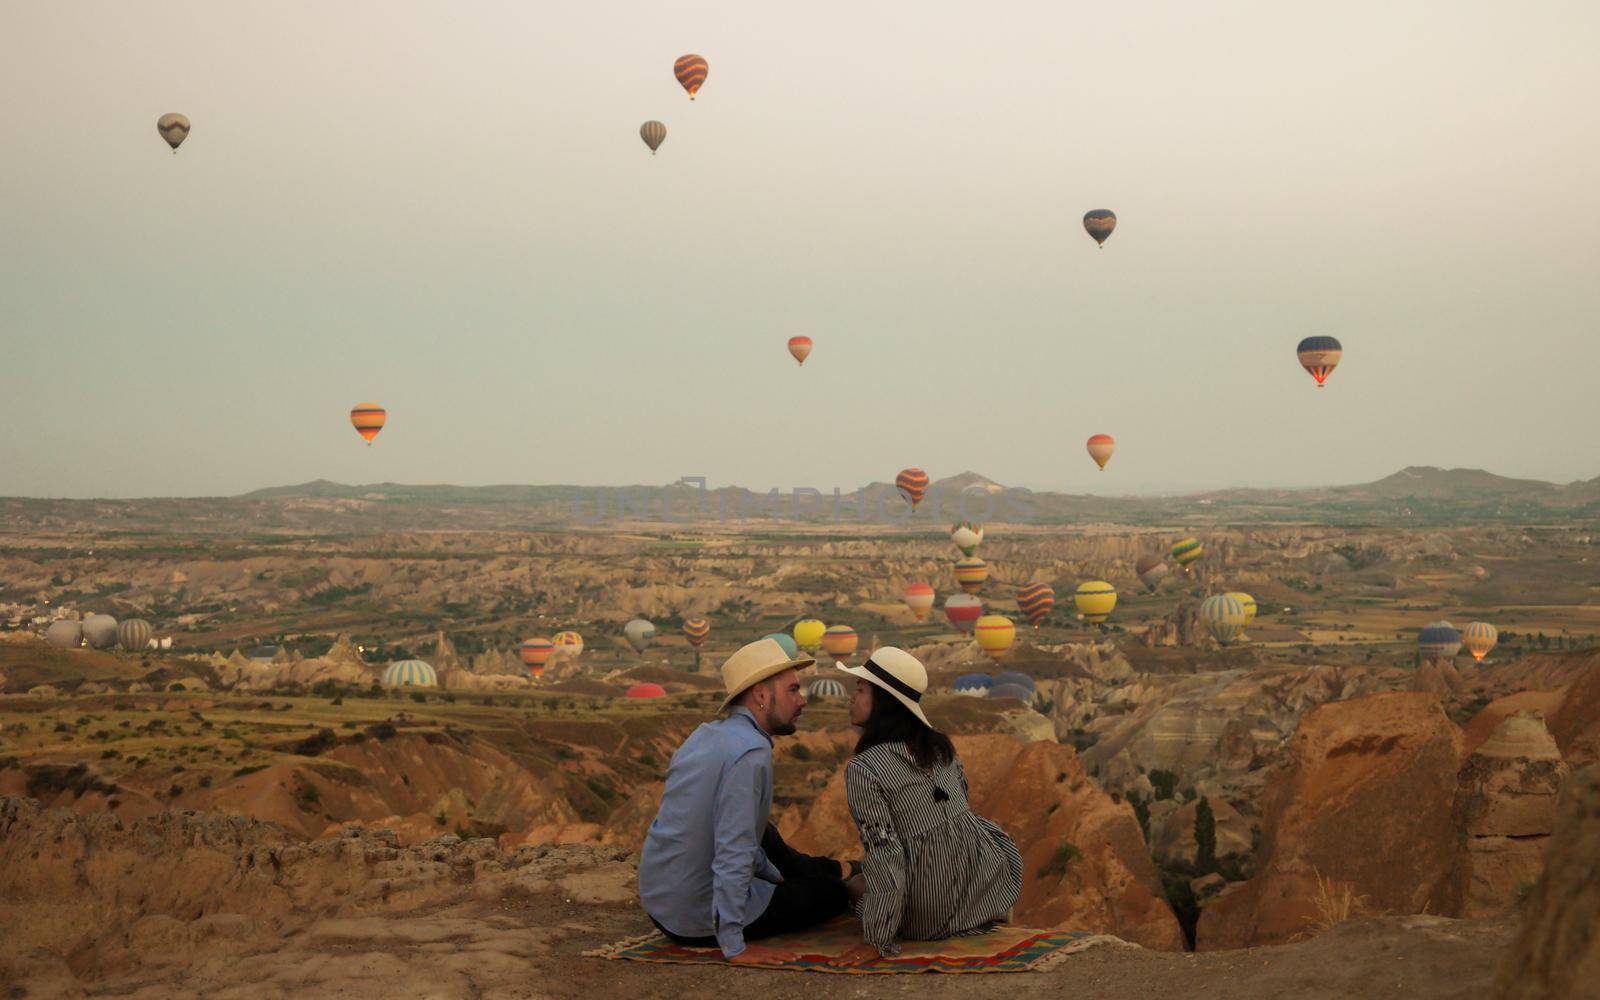 Kapadokya Cappadocia Turkey, a happy young couple during sunrise watching the hot air balloons of Kapadokya Cappadocia Turkey during vacation. Asian women and caucasian men on holiday in Turkey